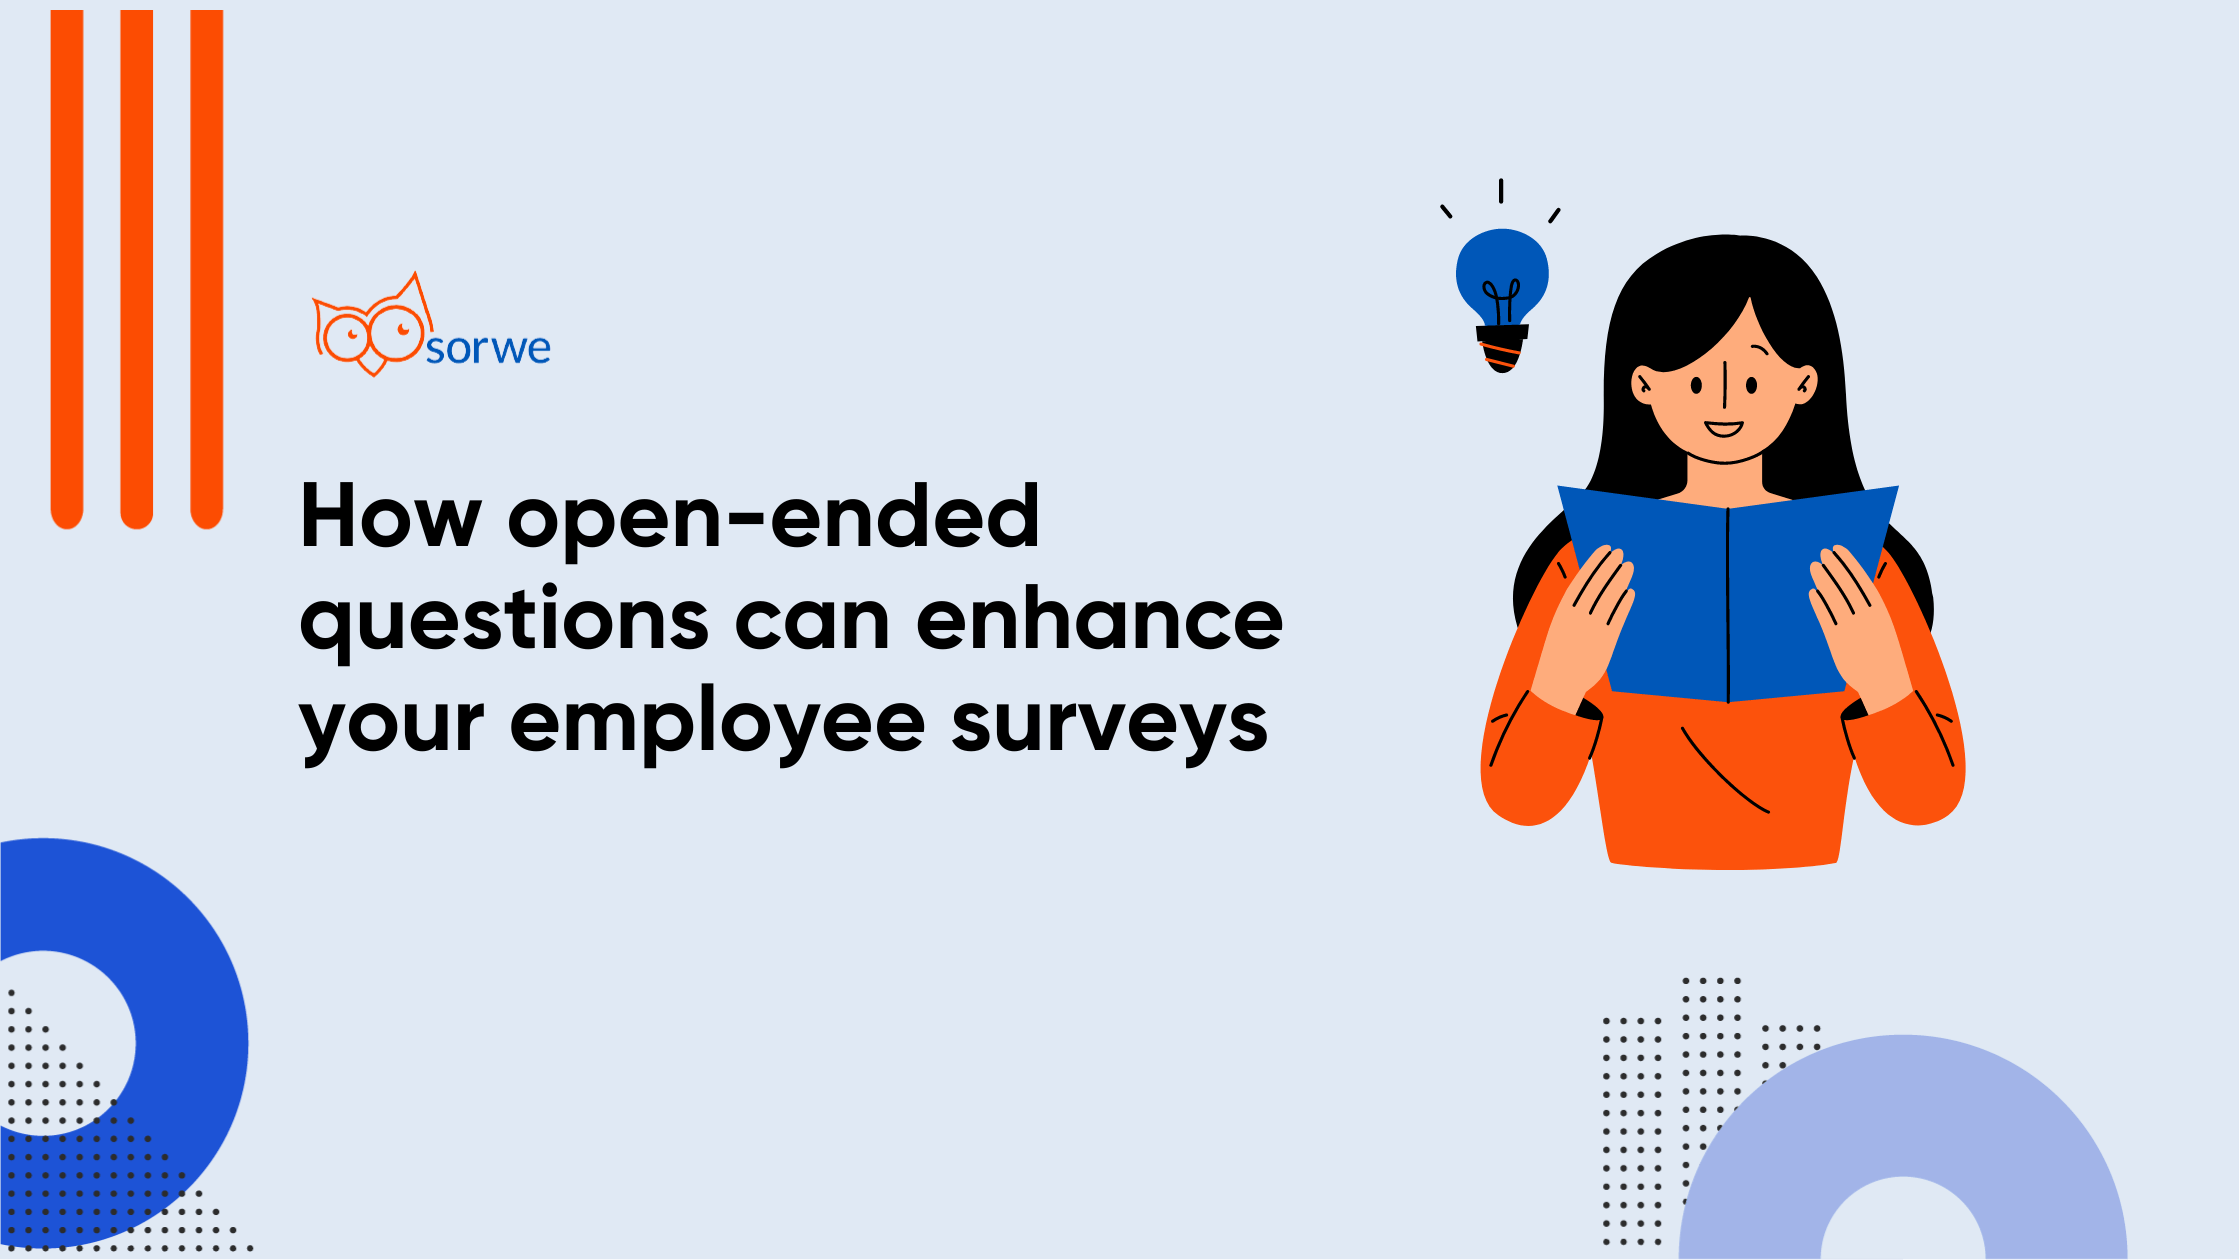 How open-ended questions can enhance your employee surveys